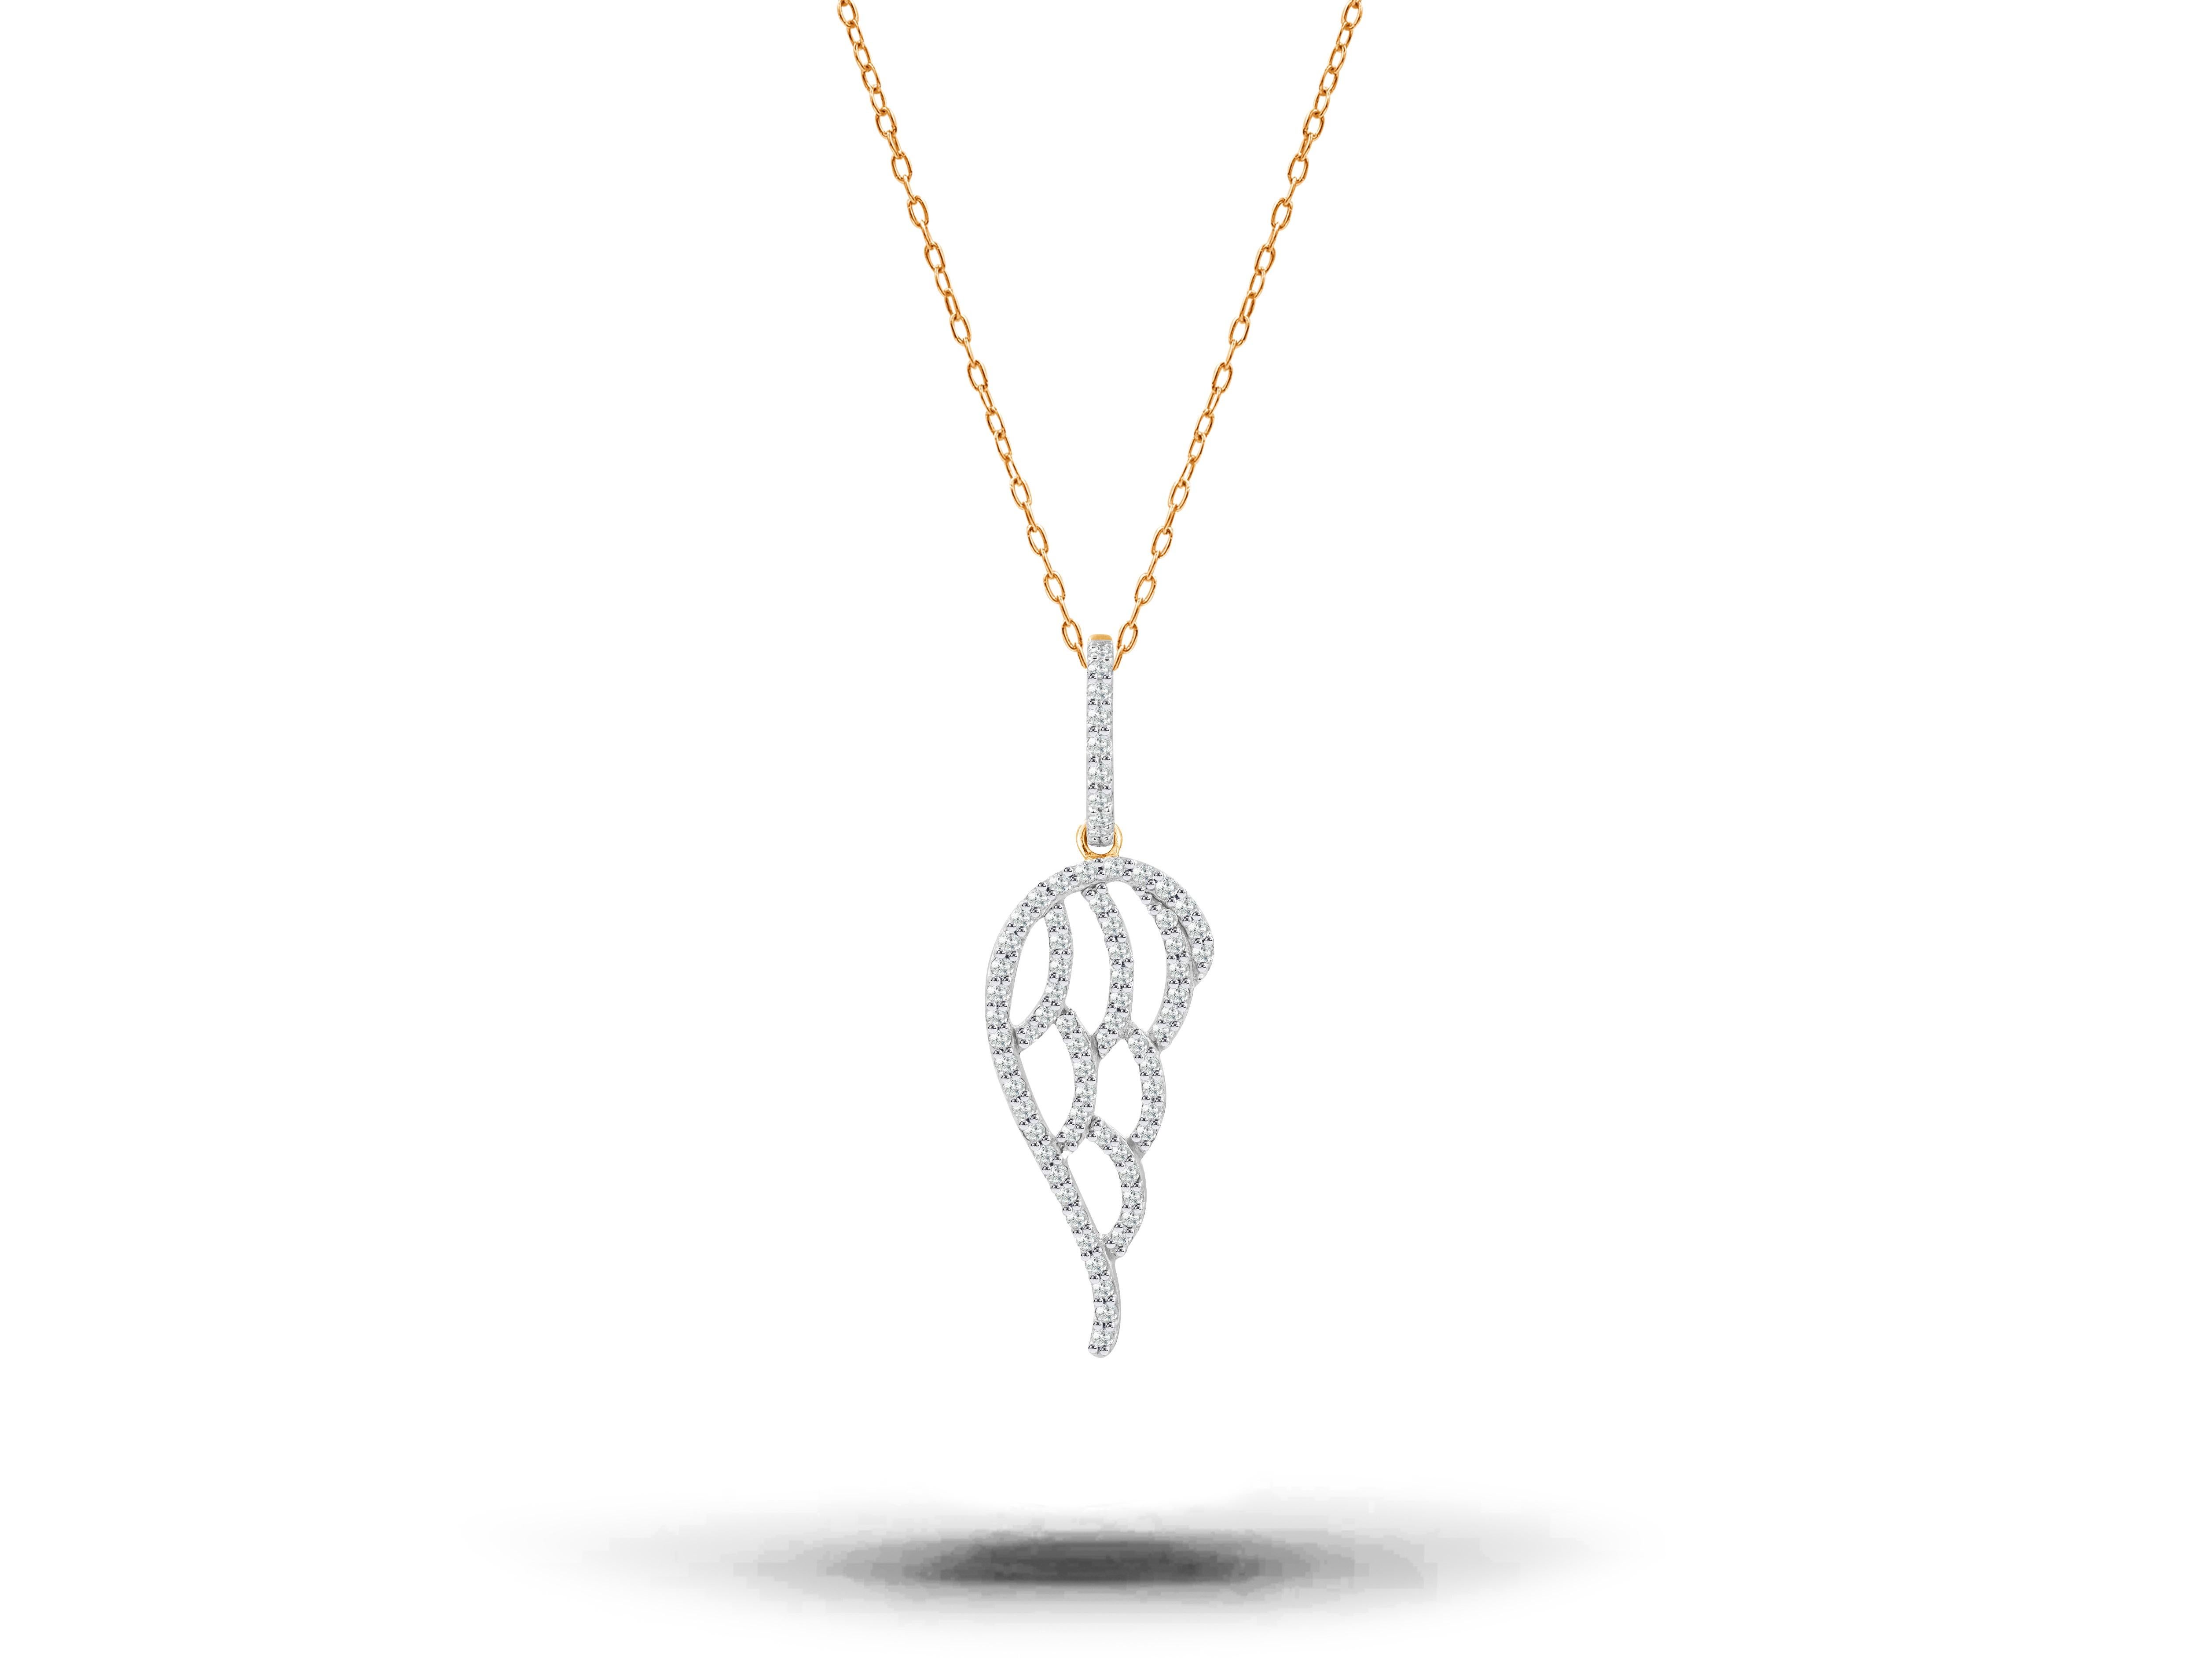 Diamond Angel Wing Necklace is made of 14K solid gold.

Available in three colors of gold: Rose Gold / White Gold / Yellow Gold.

A solid gold diamond Angel wings necklace is made with perfection of art. A Spiritual Protect gift for yourself or your